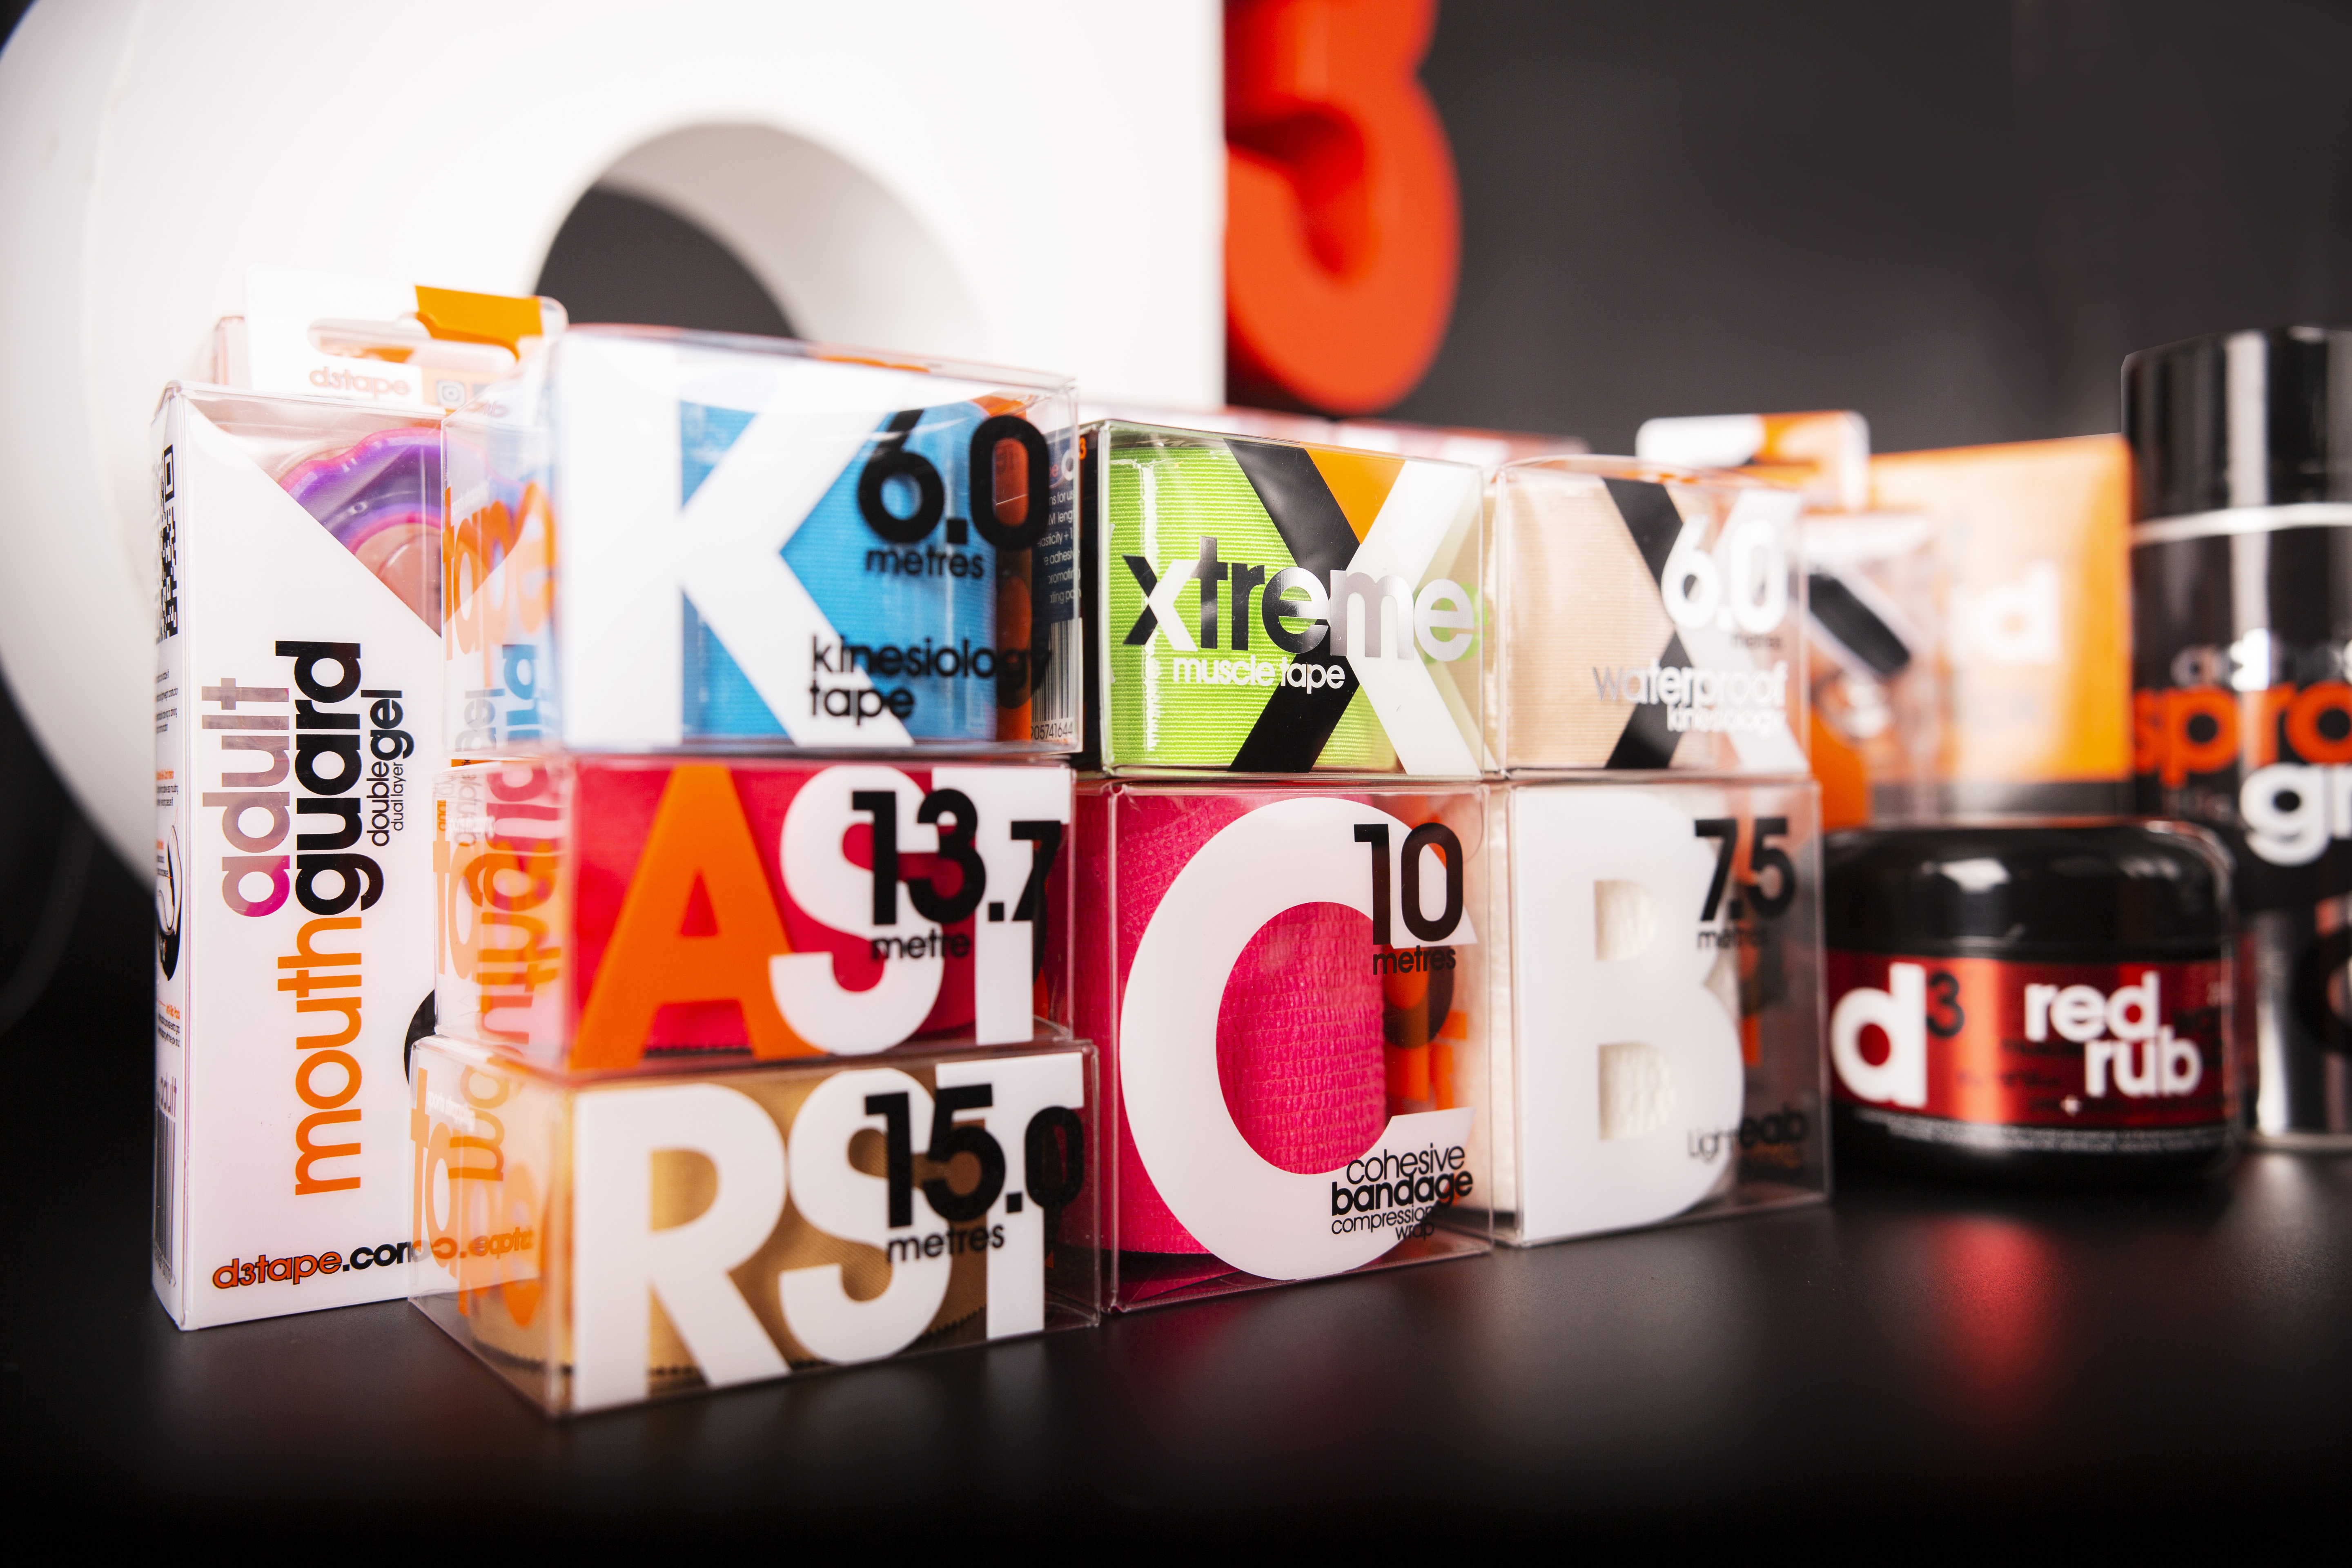 K6.0 Kinesiology Tape - d3 Tape - Strapping Tapes, Recovery Products,  Sprays - K Tape, Rigid Tape, Wholesale Available